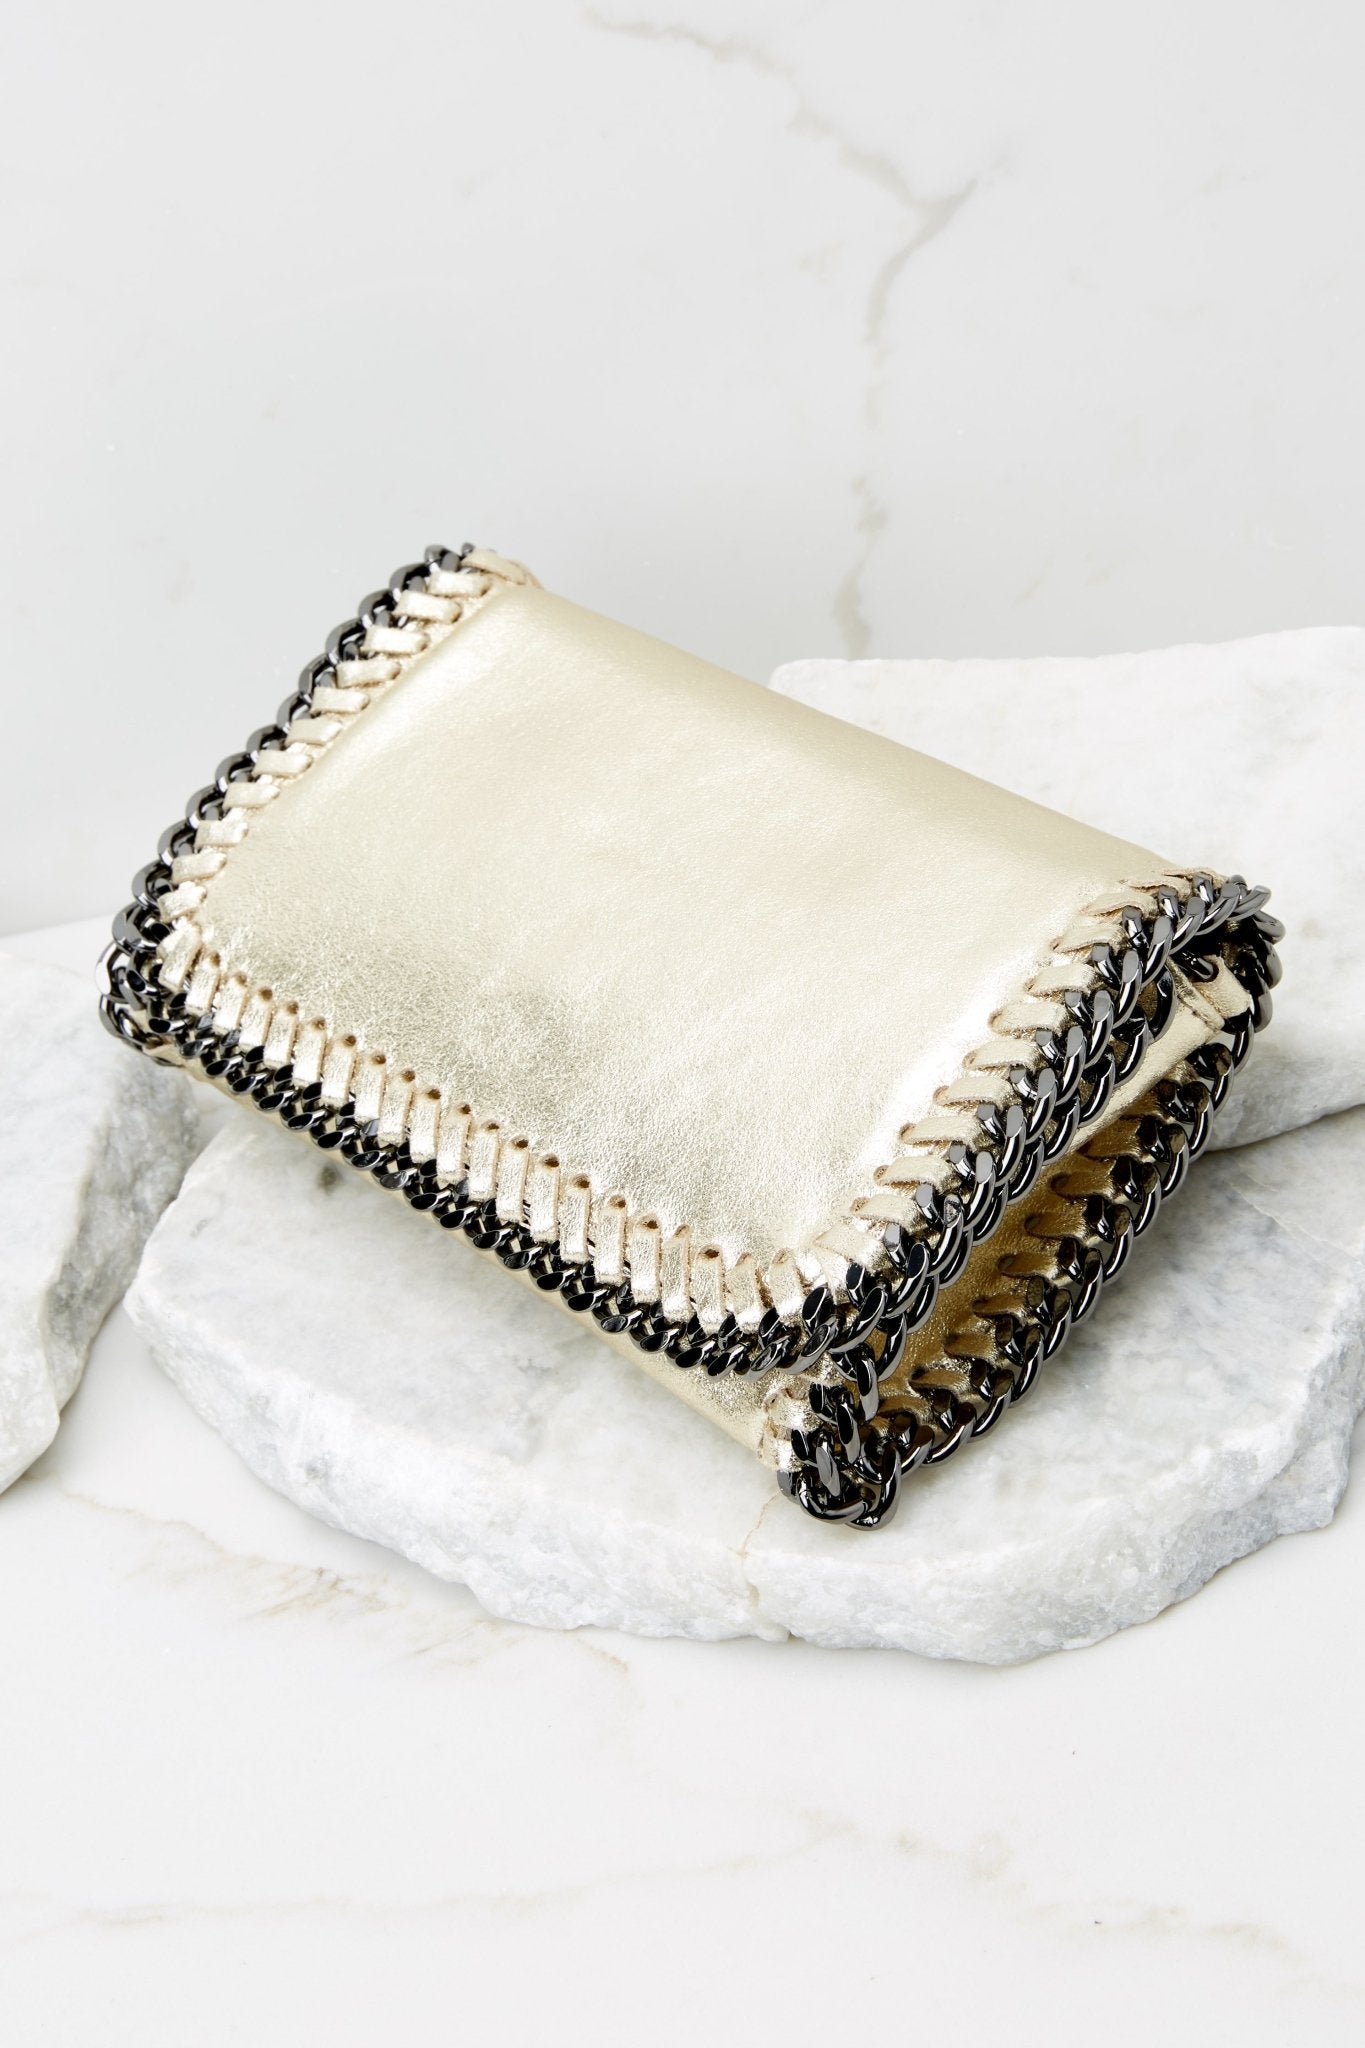 Side view of this clutch that features a front flap that has a silver magnetic closure, an inside zipper, a removable leather strap, and wide decorative stitching around the edges. 